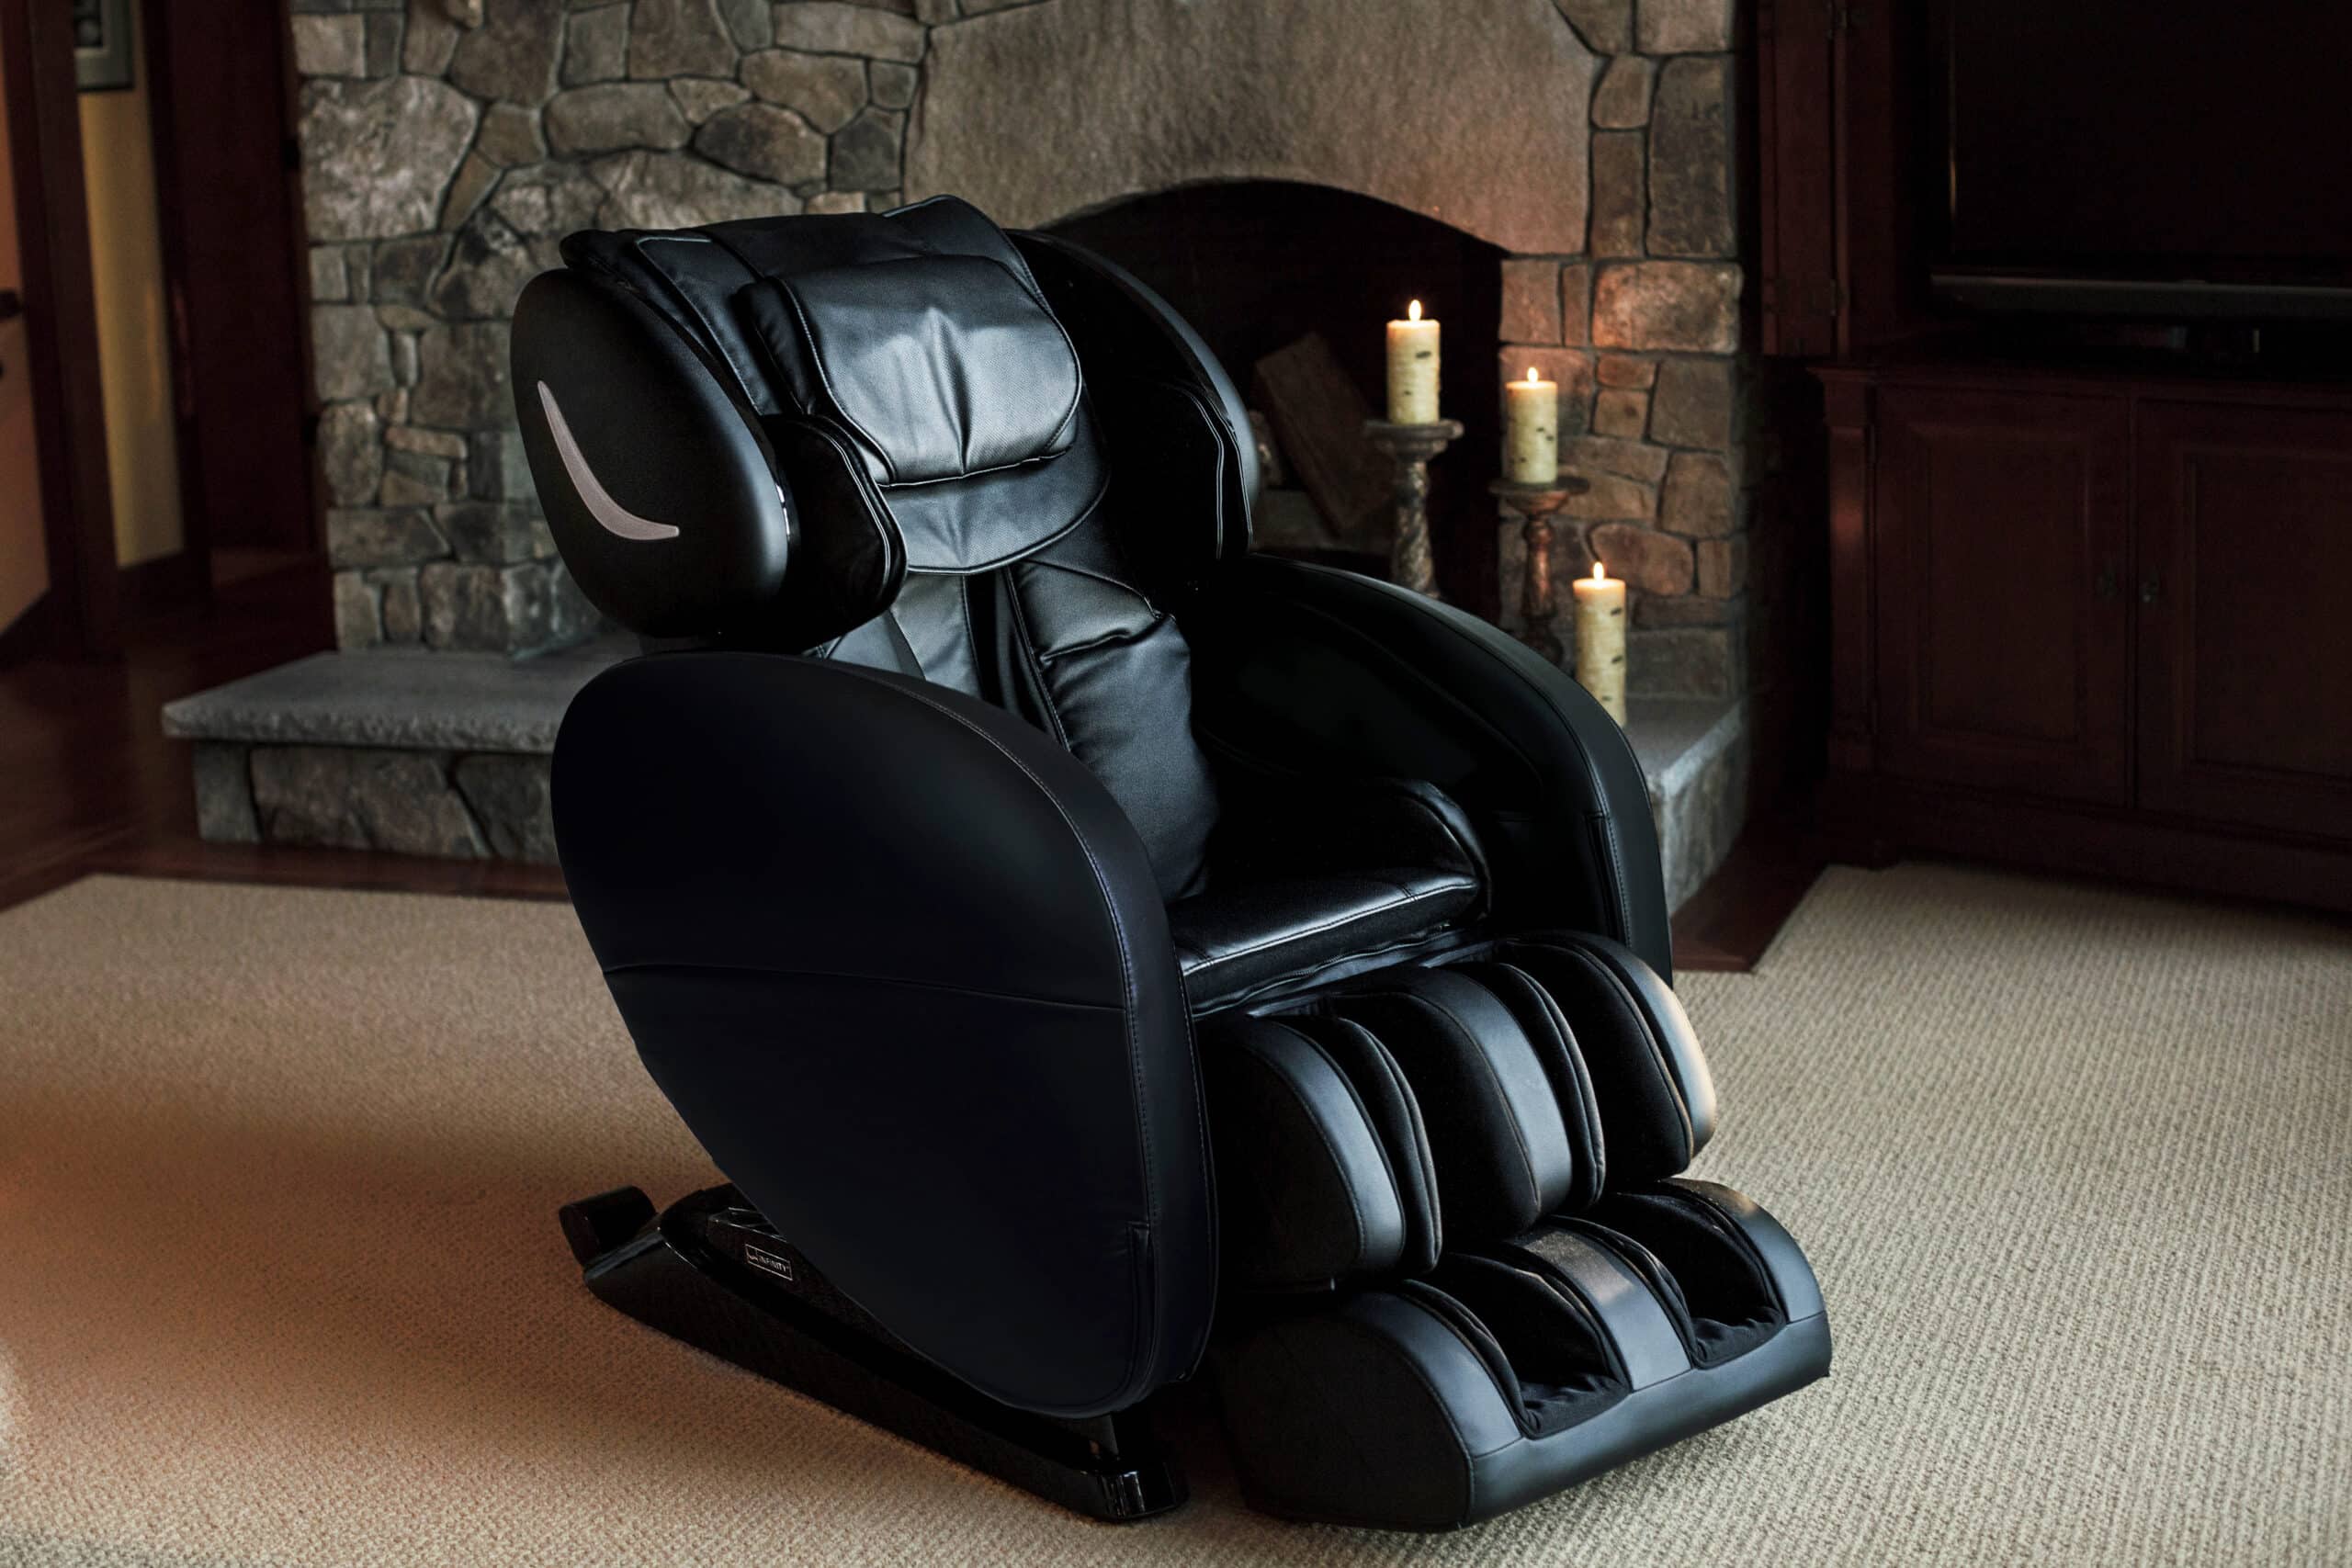 A black SmartChair X3 with massage chair technology in a living room